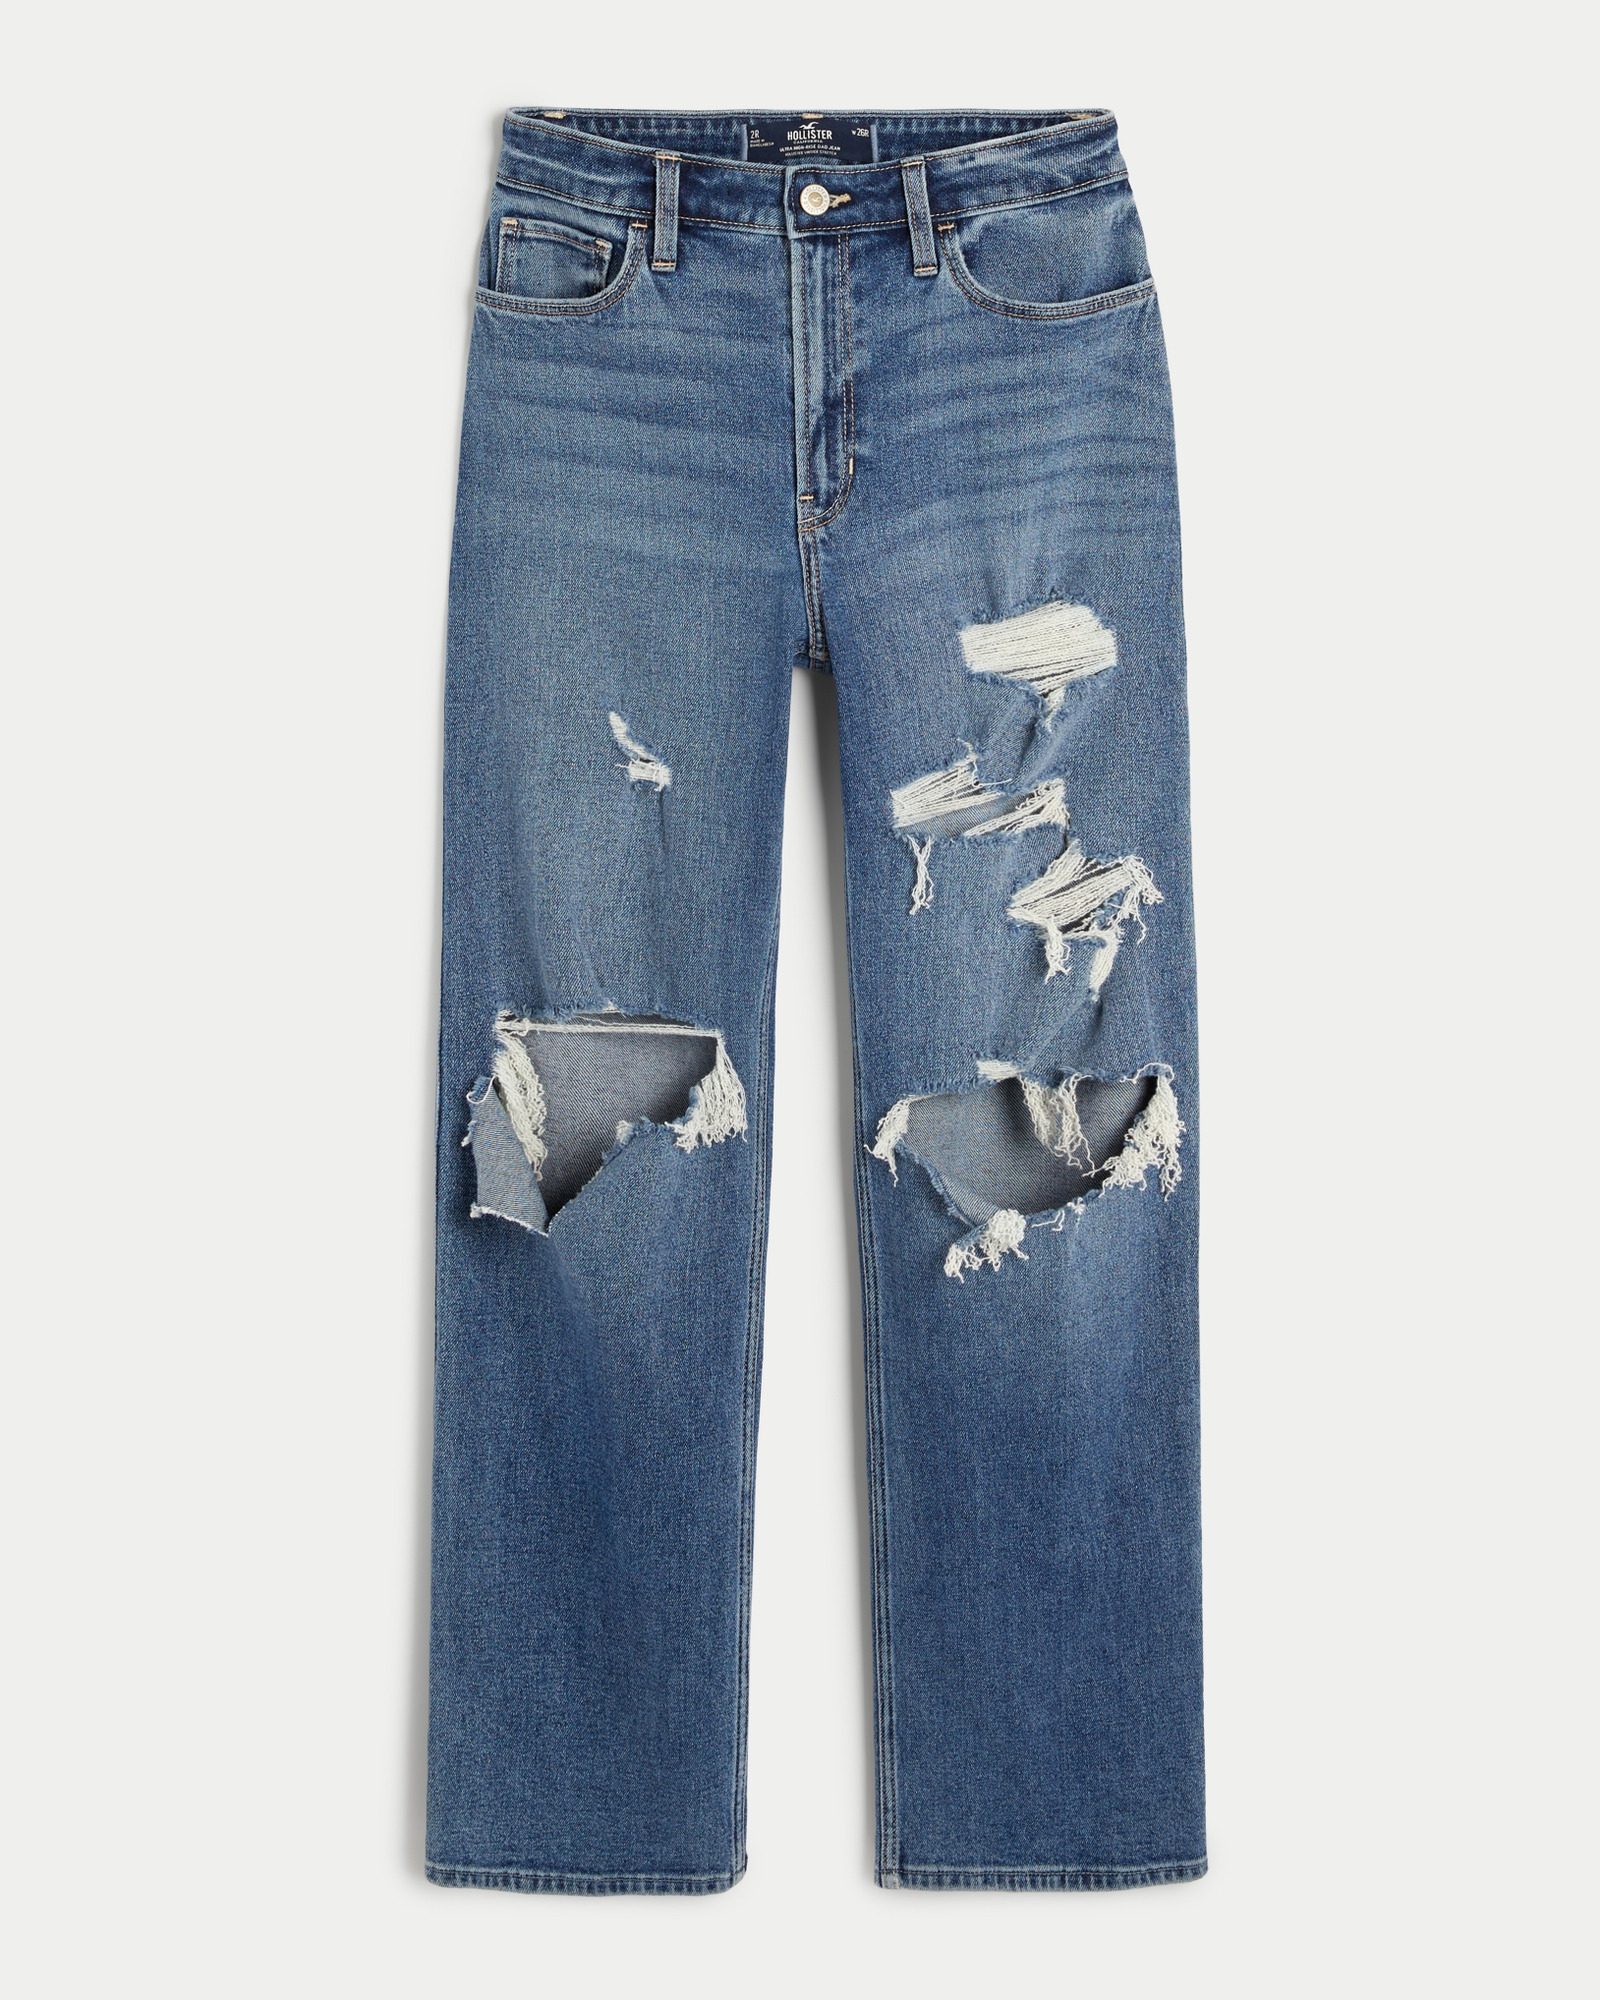 Hollister Mom Jeans Blue Size 4 - $20 (50% Off Retail) - From Abby